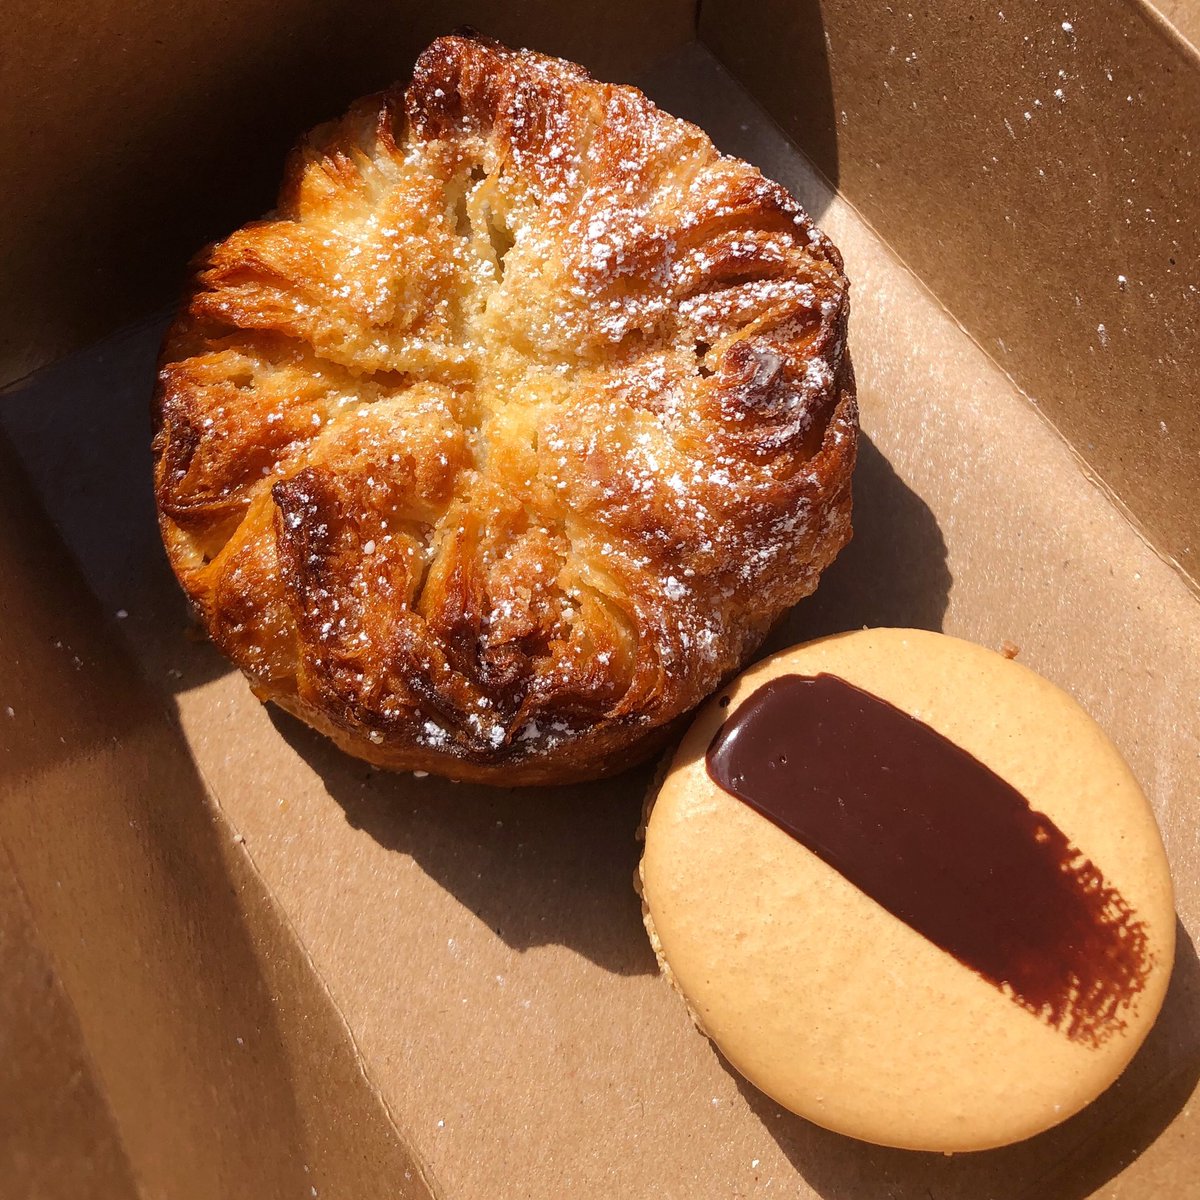 Treat yourself to something sweet from LTC by La Tour Cafe! We love the macaroons and Kouign Amanns!